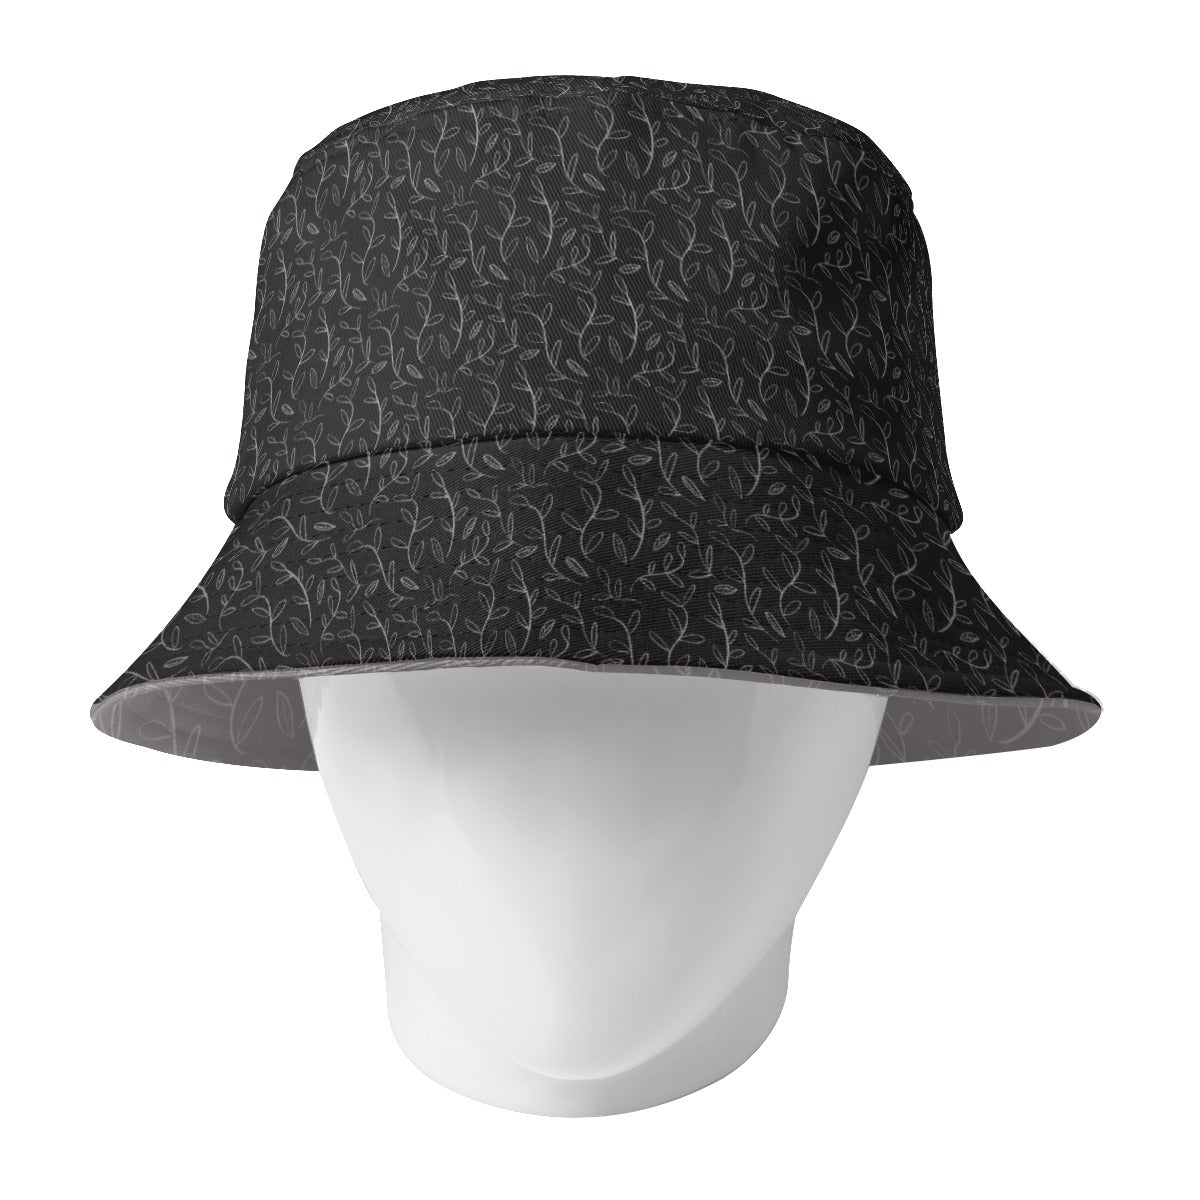 Super Bloom Collection Black & Grey Beige leaves Fisherman Hat. Design hand-painted by the Designer Maria Echenique